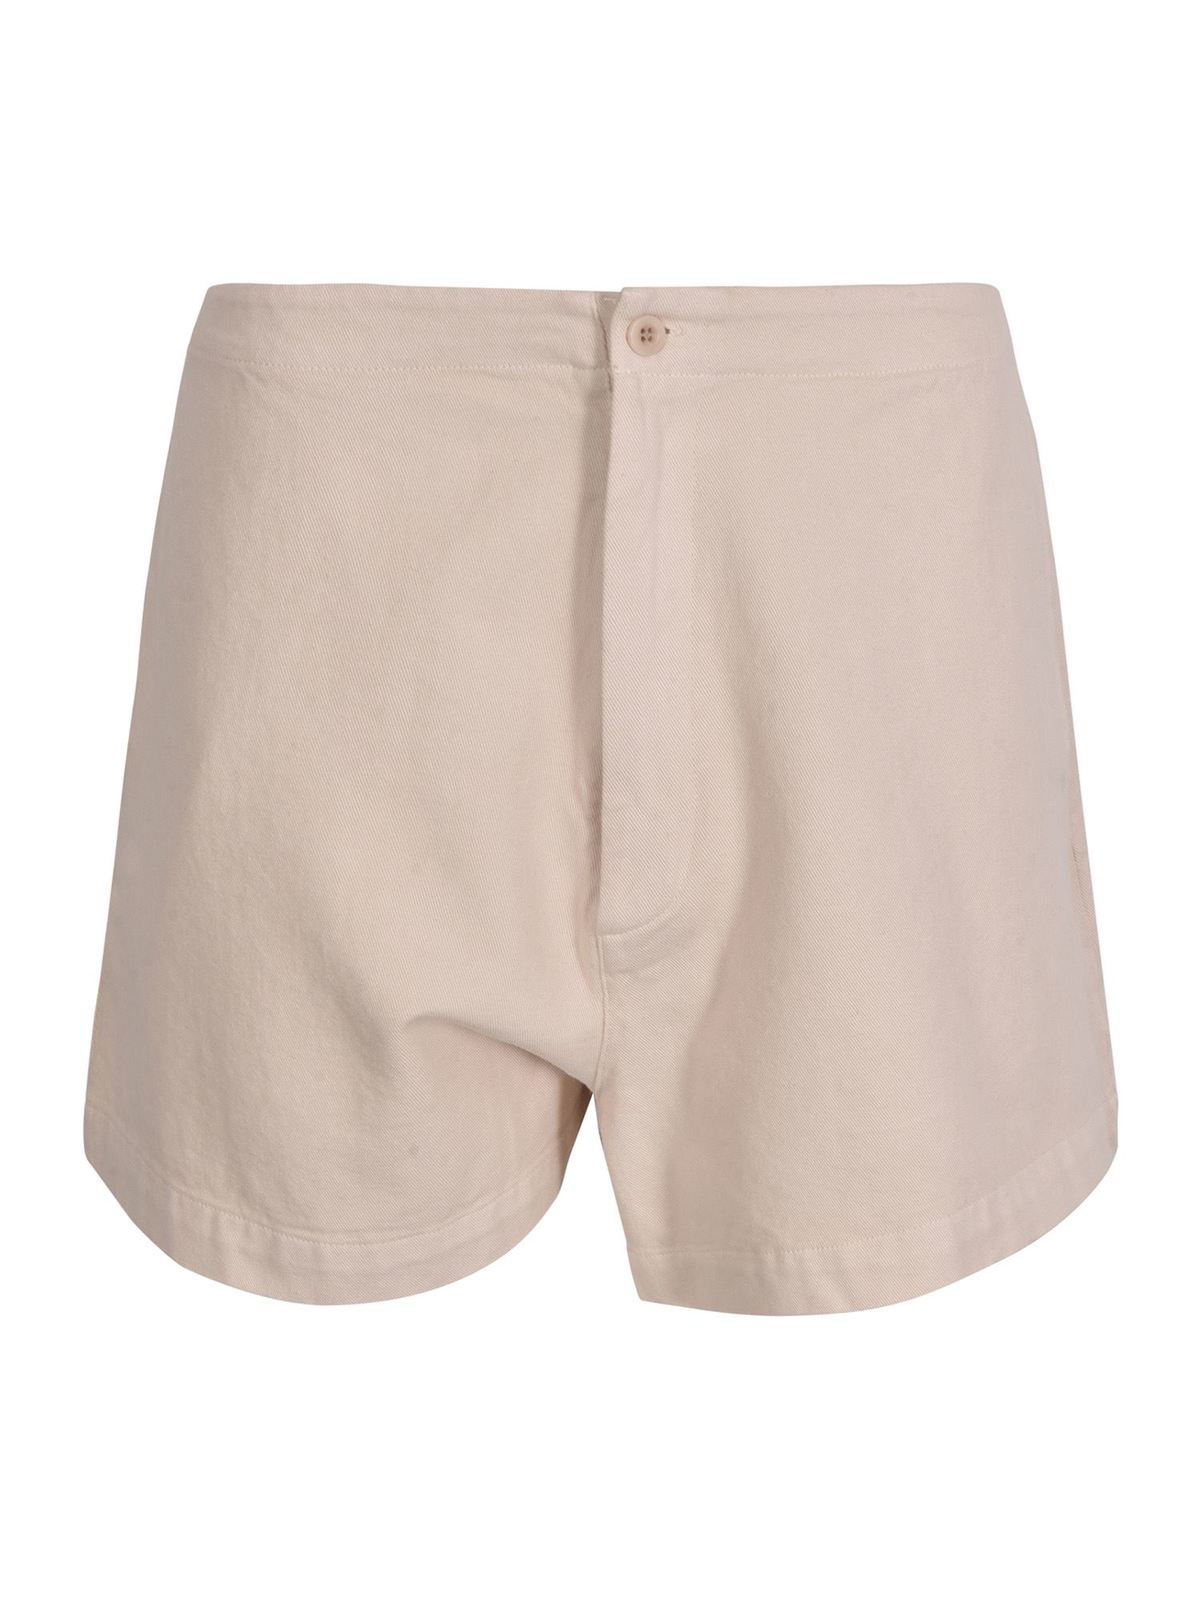 Labo.art COTTON SHORTS IN ROPE COLOR